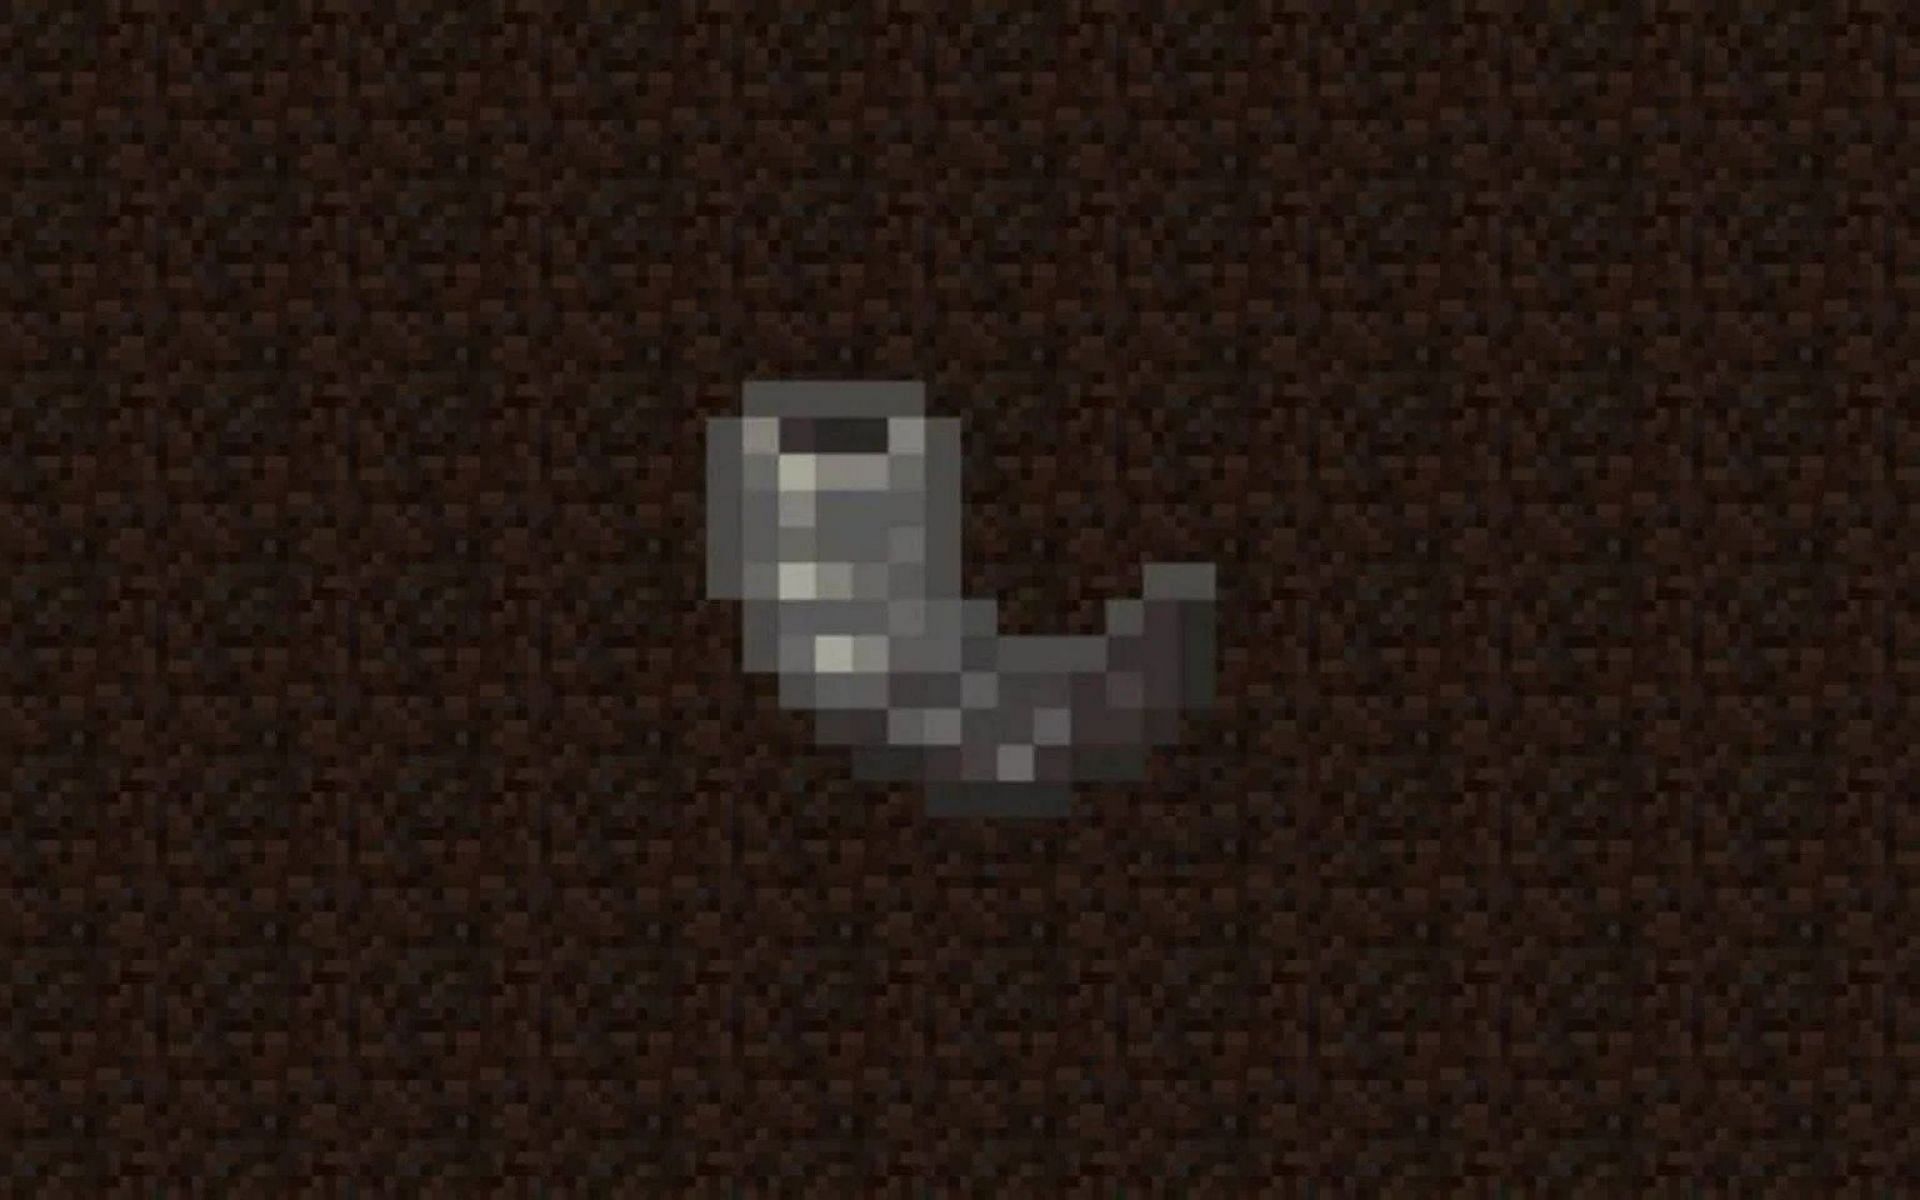 Goat horns were introduced in the Caves &amp; Cliffs update (Image via Mojang)